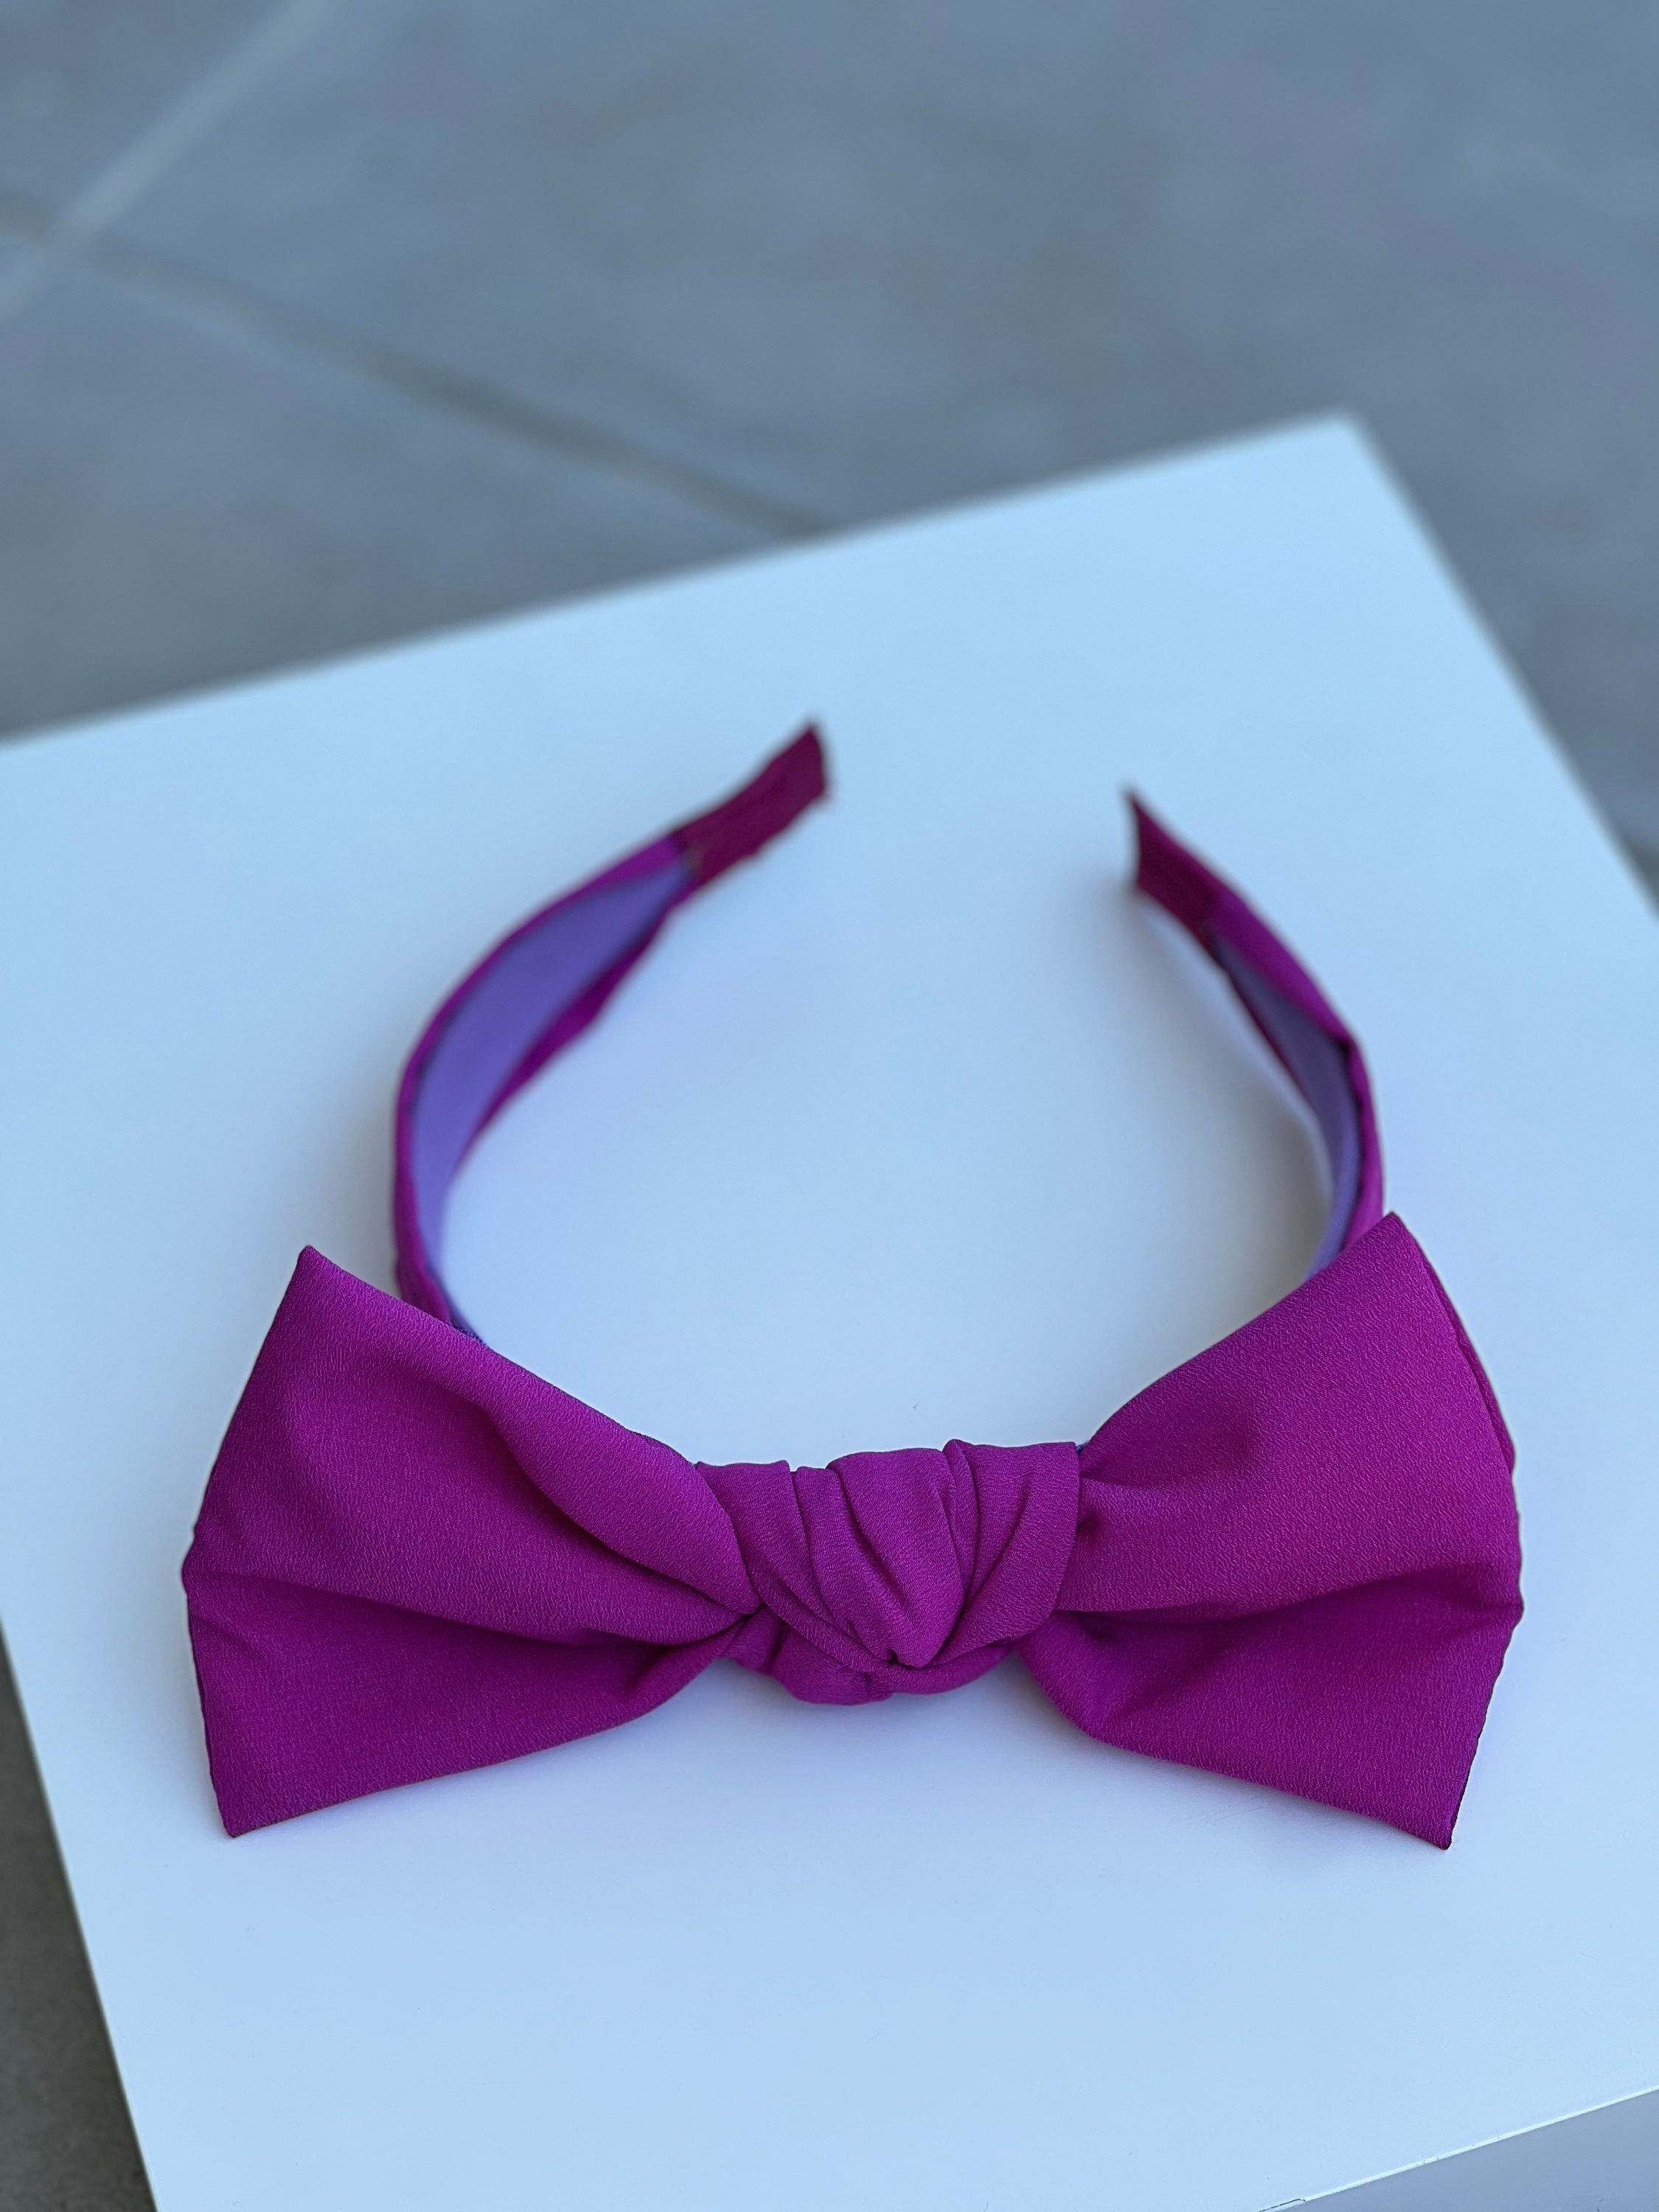 Make a statement with this bold fuschia bow headband for women